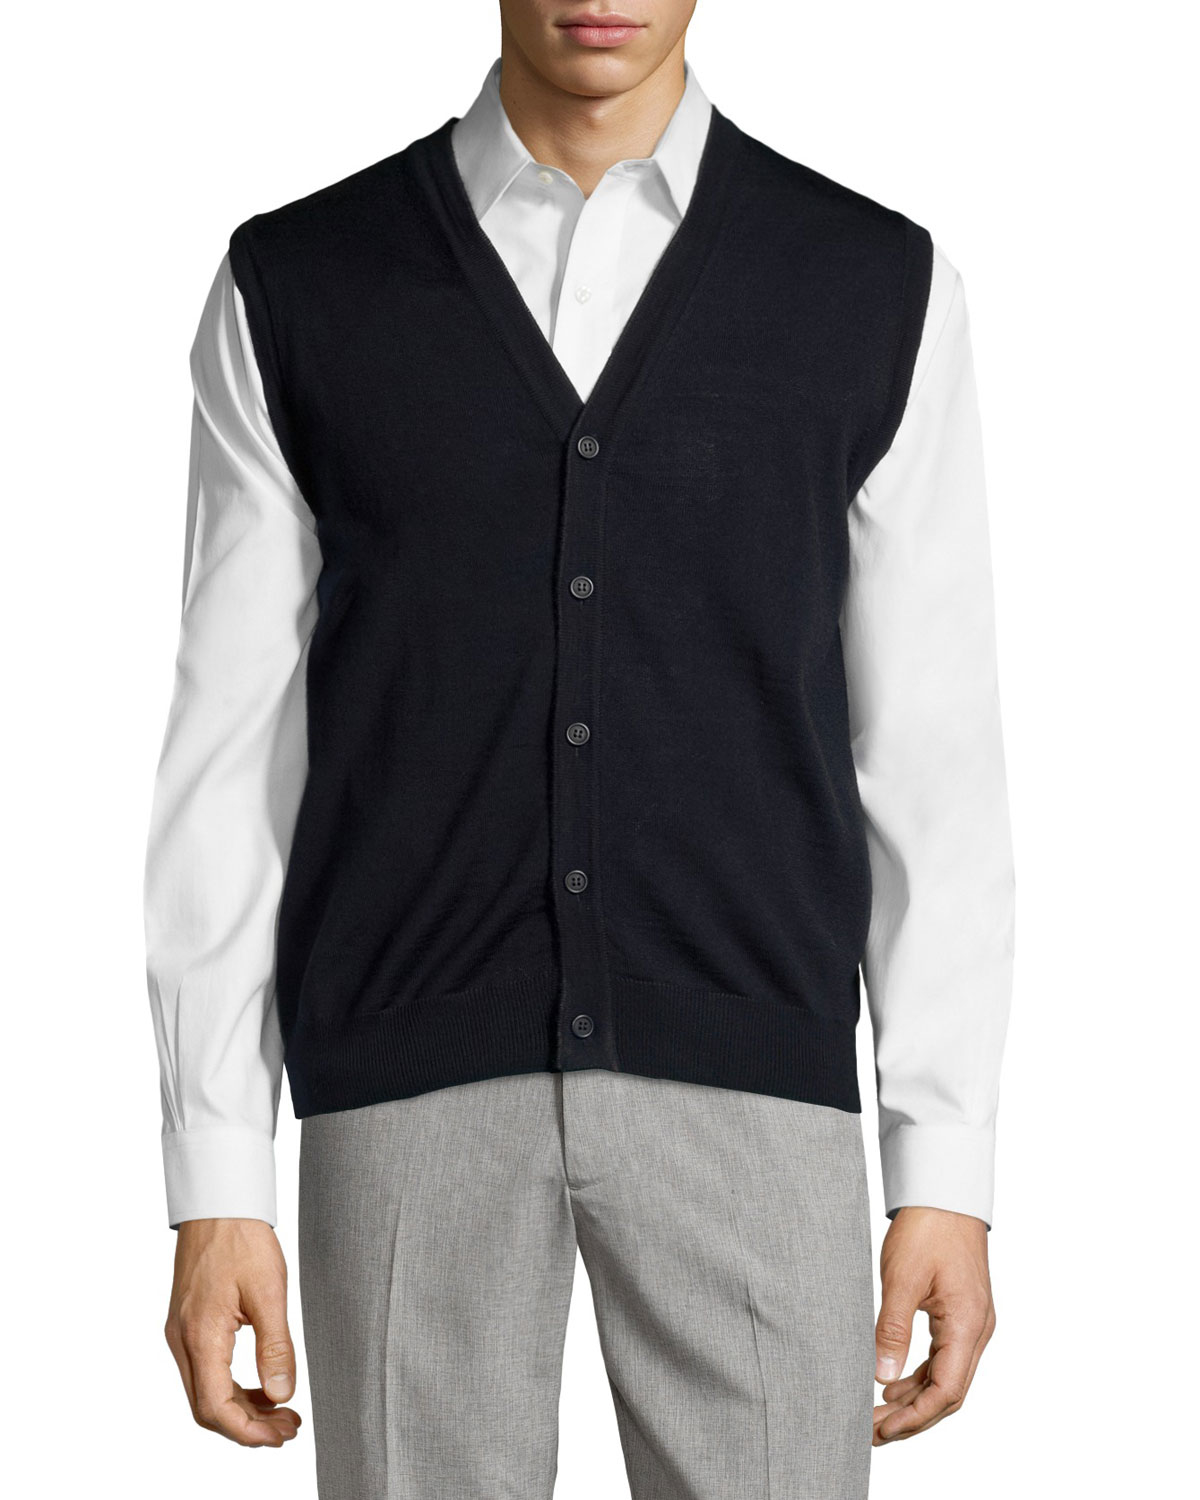 Black Sweater Vest Men - Cardigan With Buttons